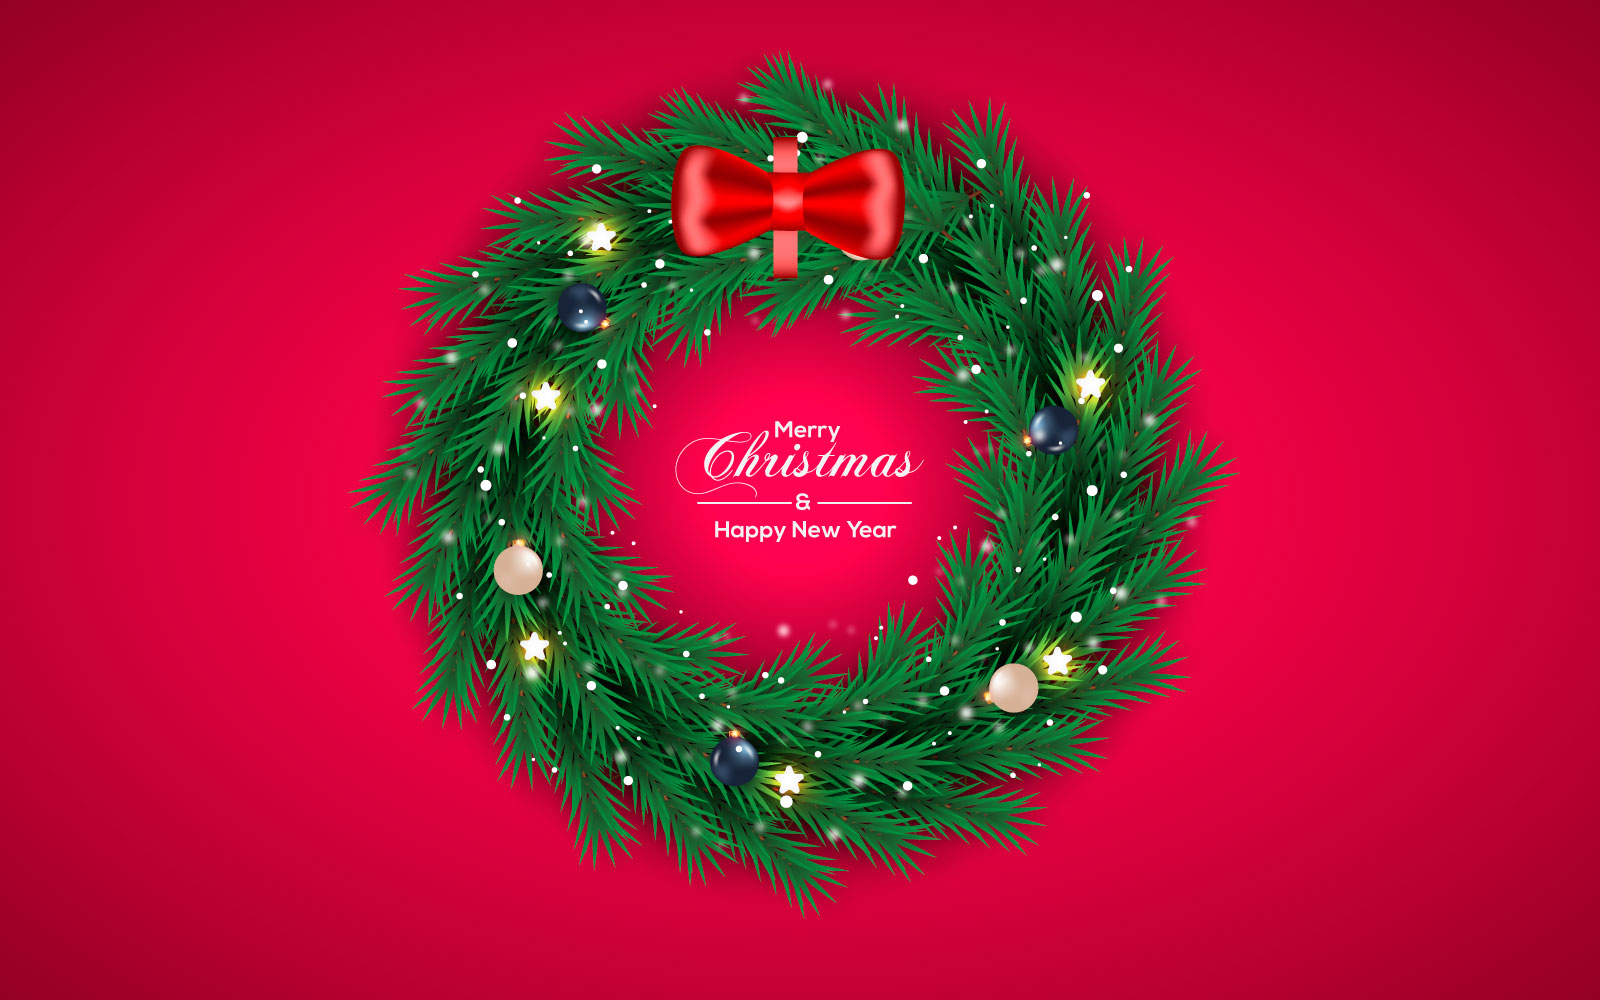 Best christmas wishes wreath with decorated  wreath flat vector illustratio